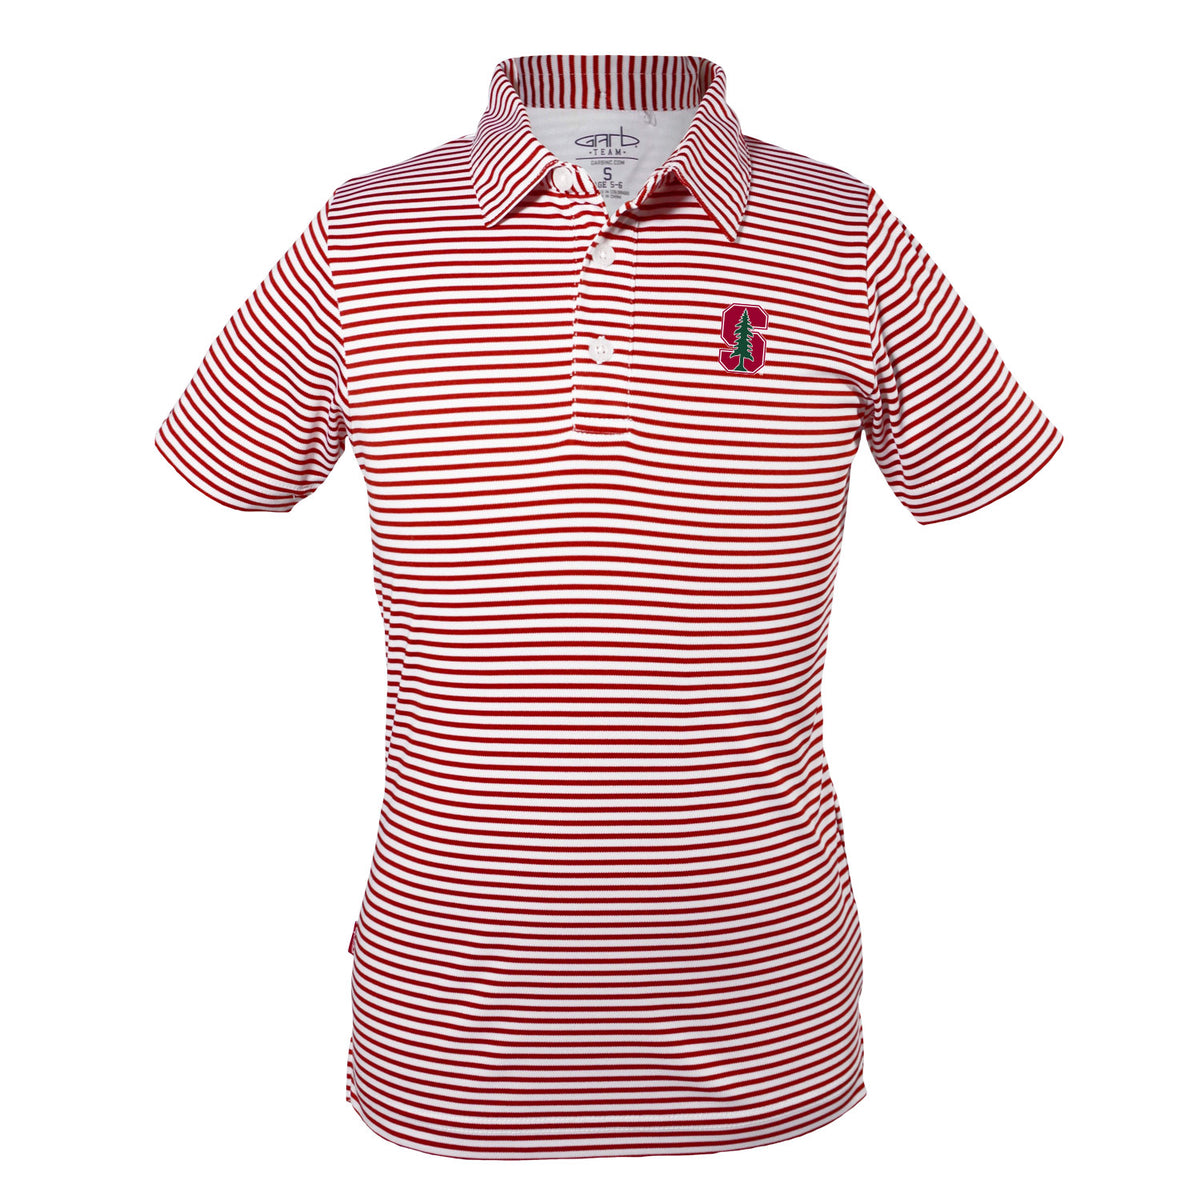 Stanford Cardinal Youth Boys' Polo